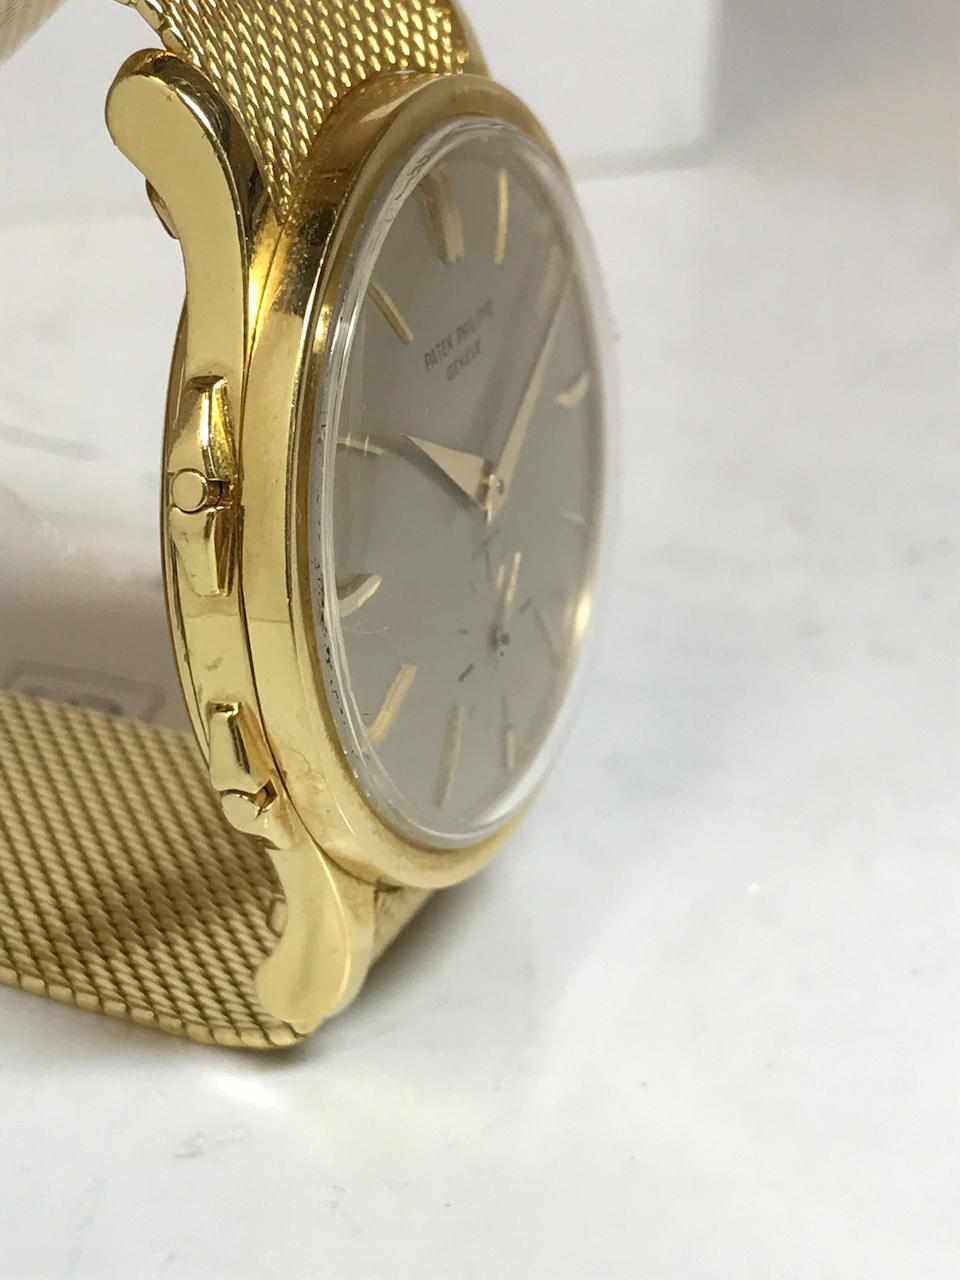 Patek Philippe. A fine and rare 18K gold dual time zone wristwatch with independently adjustable hour hand and an 18K gold braceletRetailed by G&#252;belin Ref: 2597, 1961